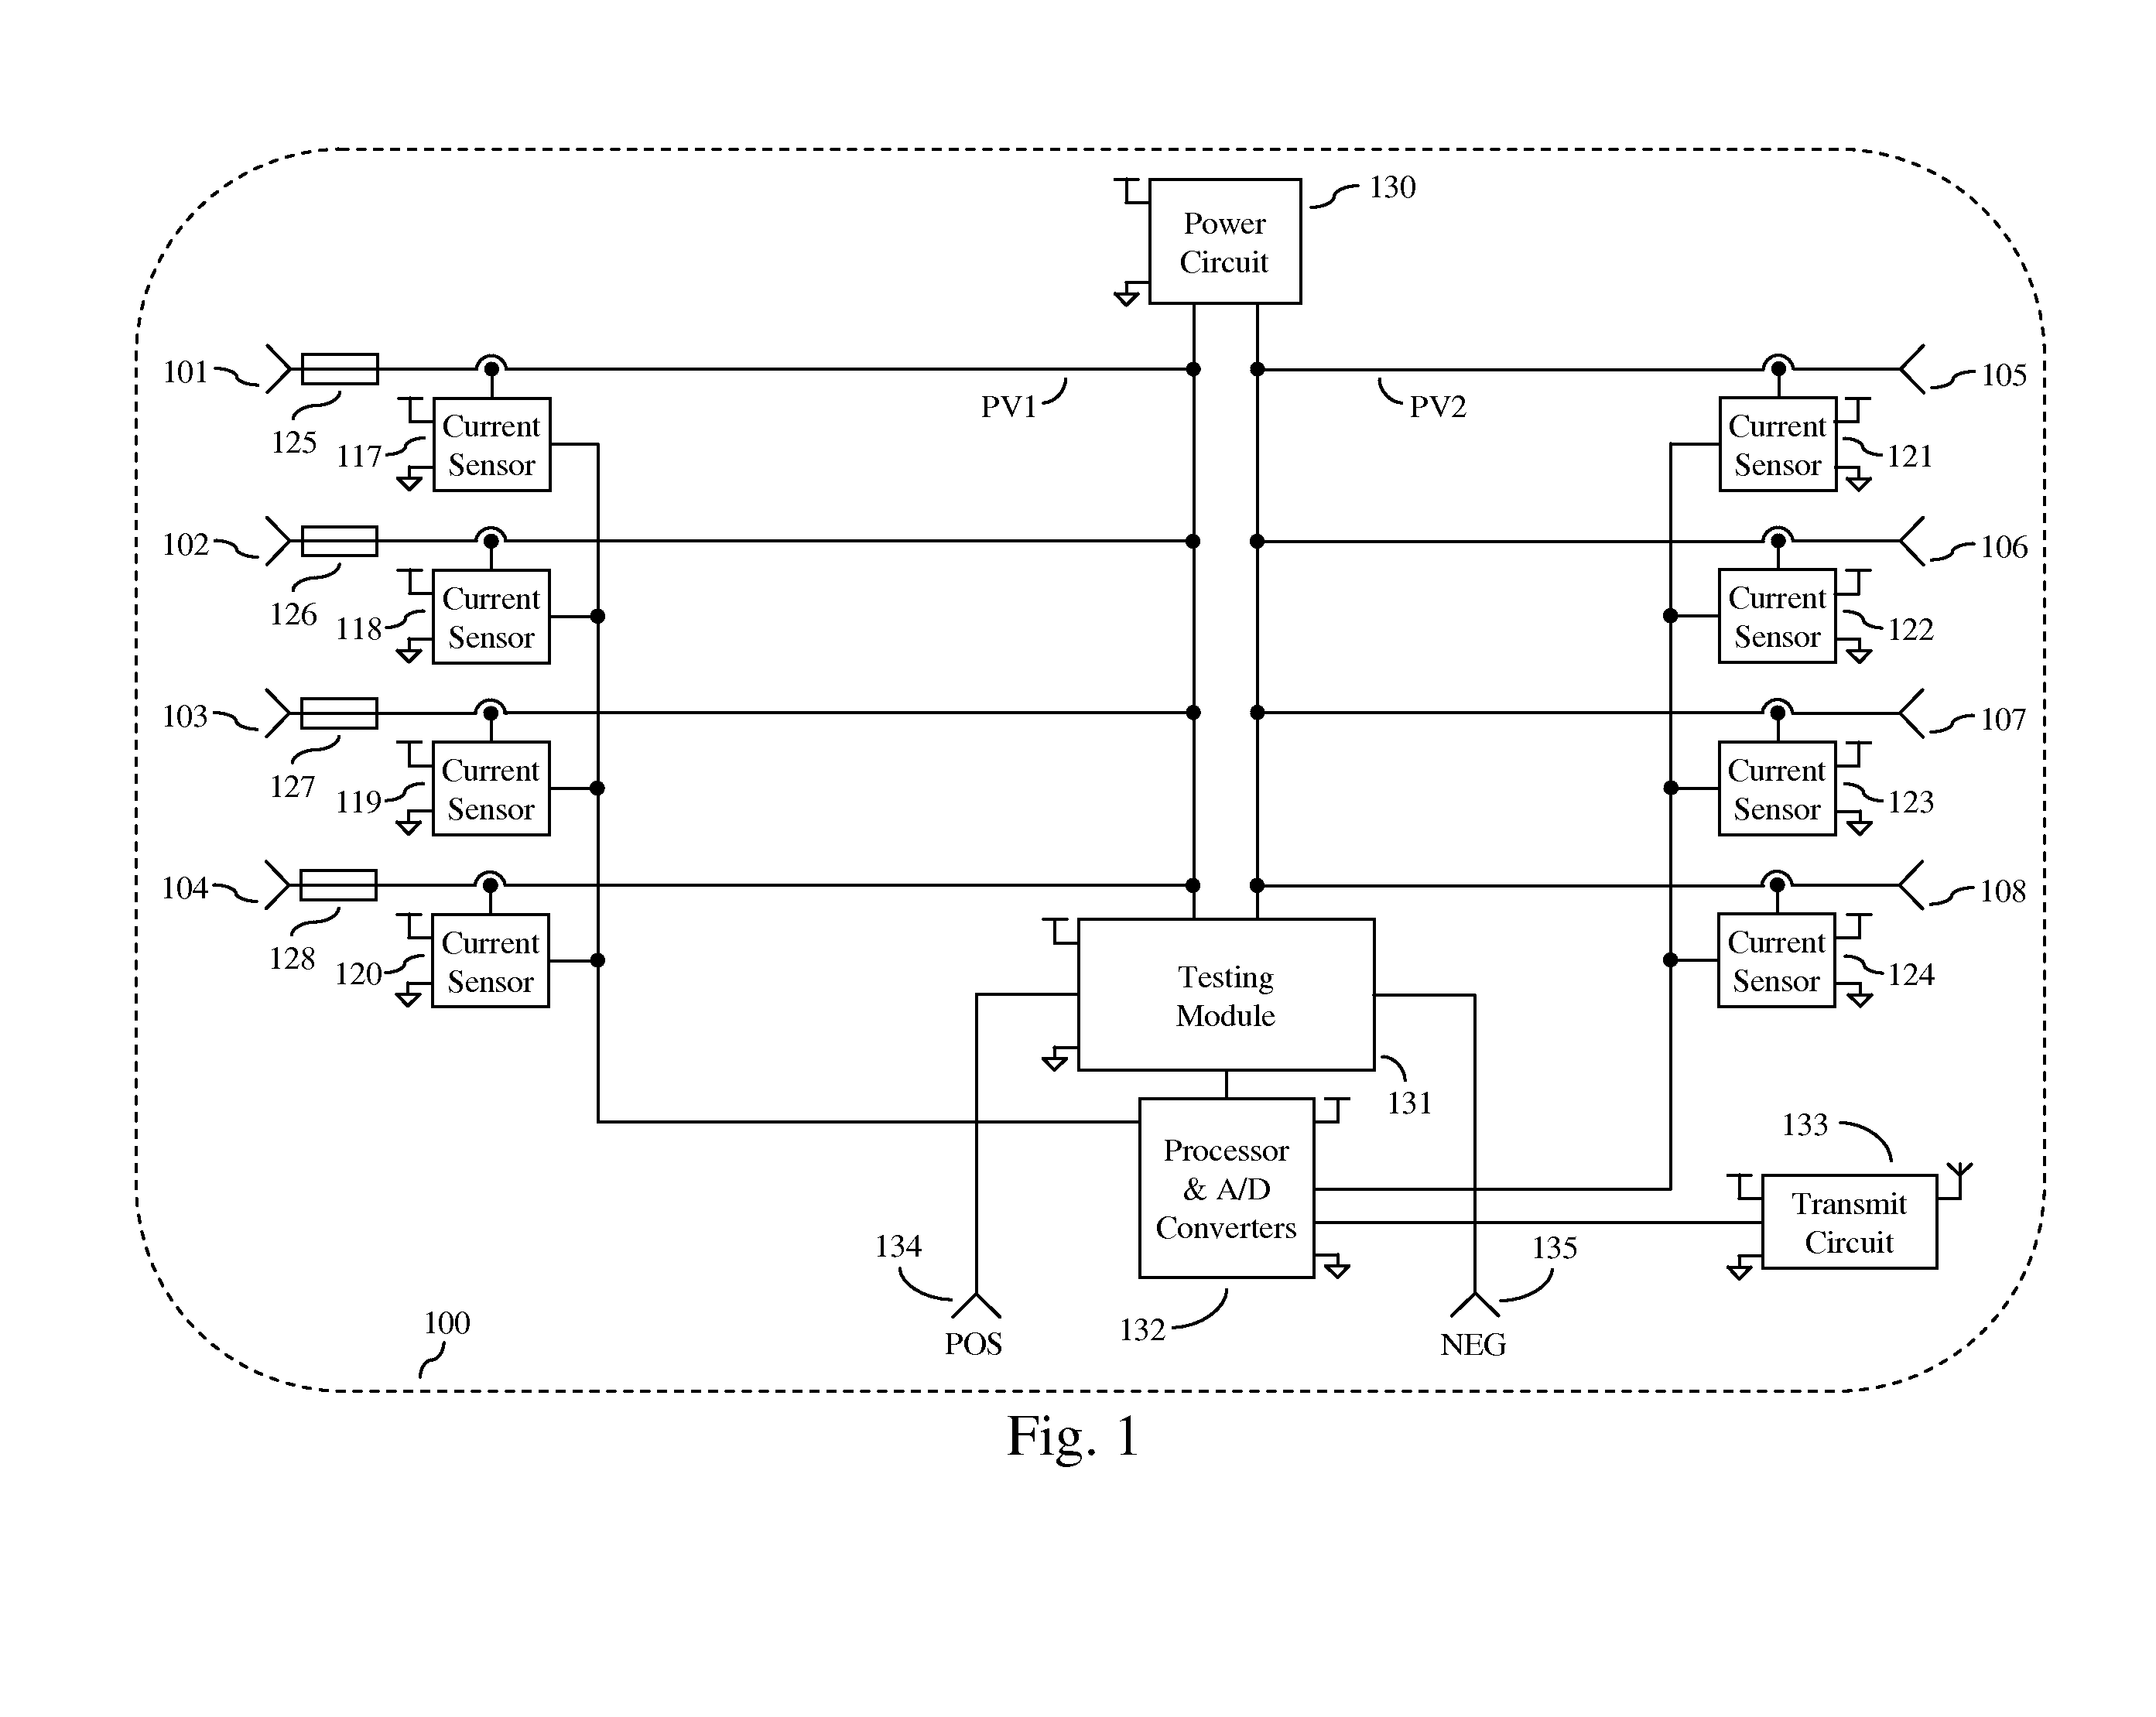 Active and passive monitoring system for installed photovoltaic strings, substrings, and modules